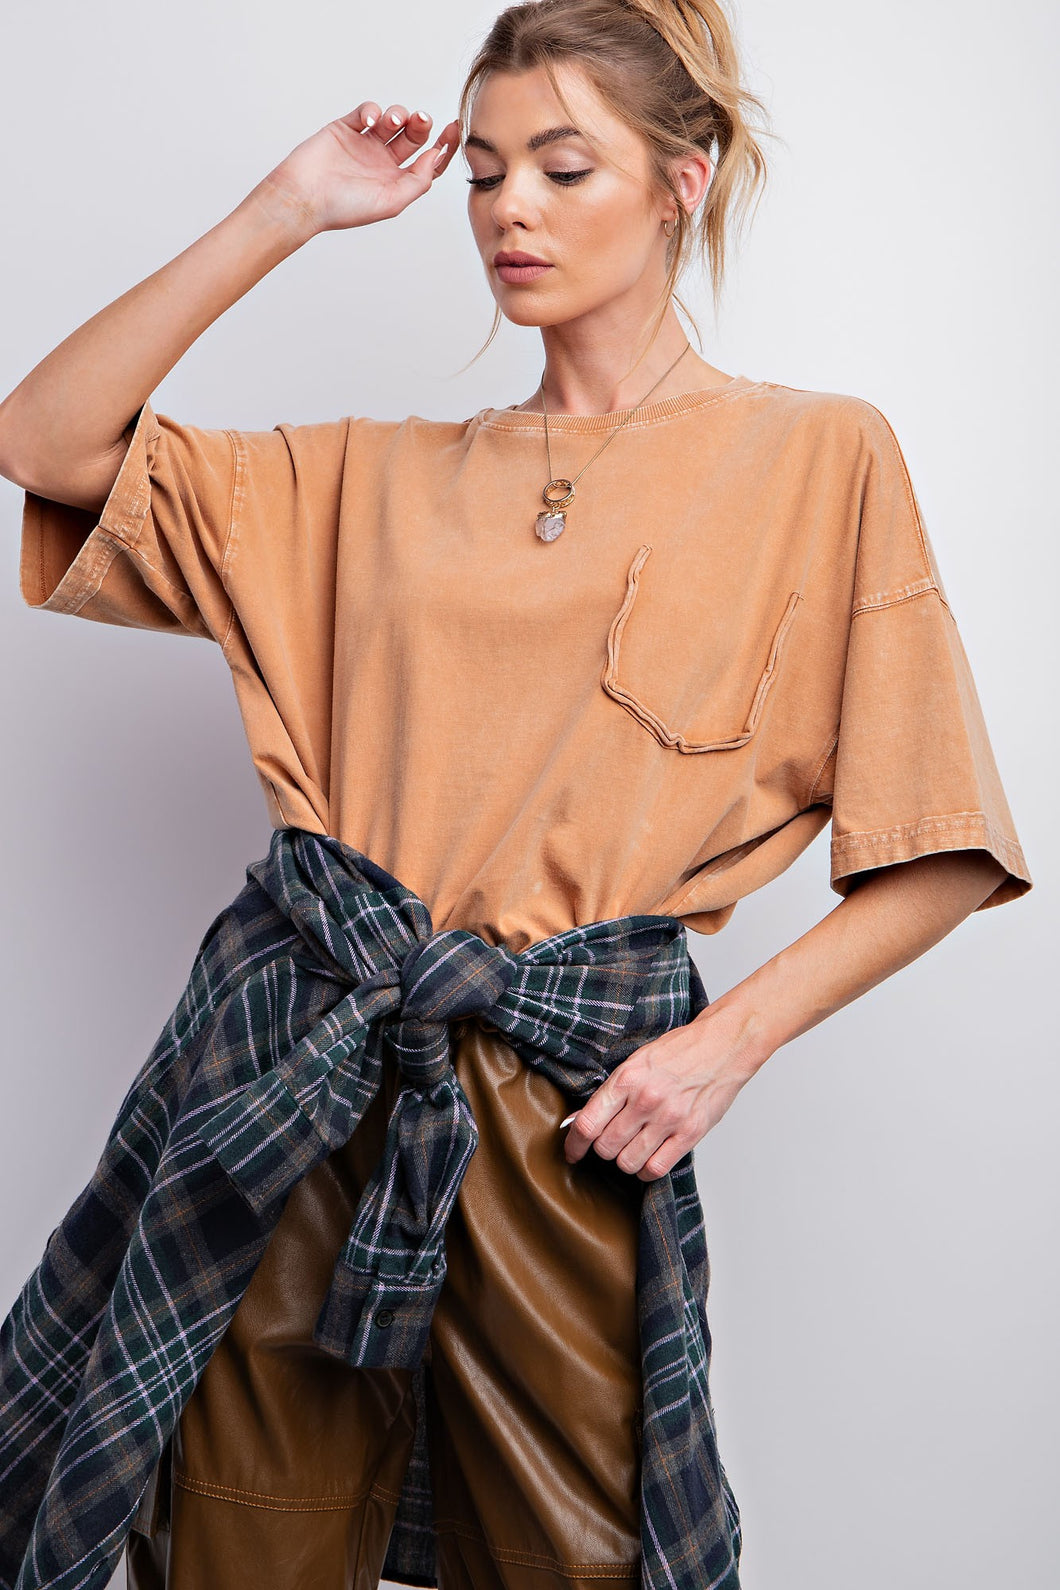 Easel Short Sleeve Mineral Wash Tunic Top in Toffee Shirts & Tops Easel   